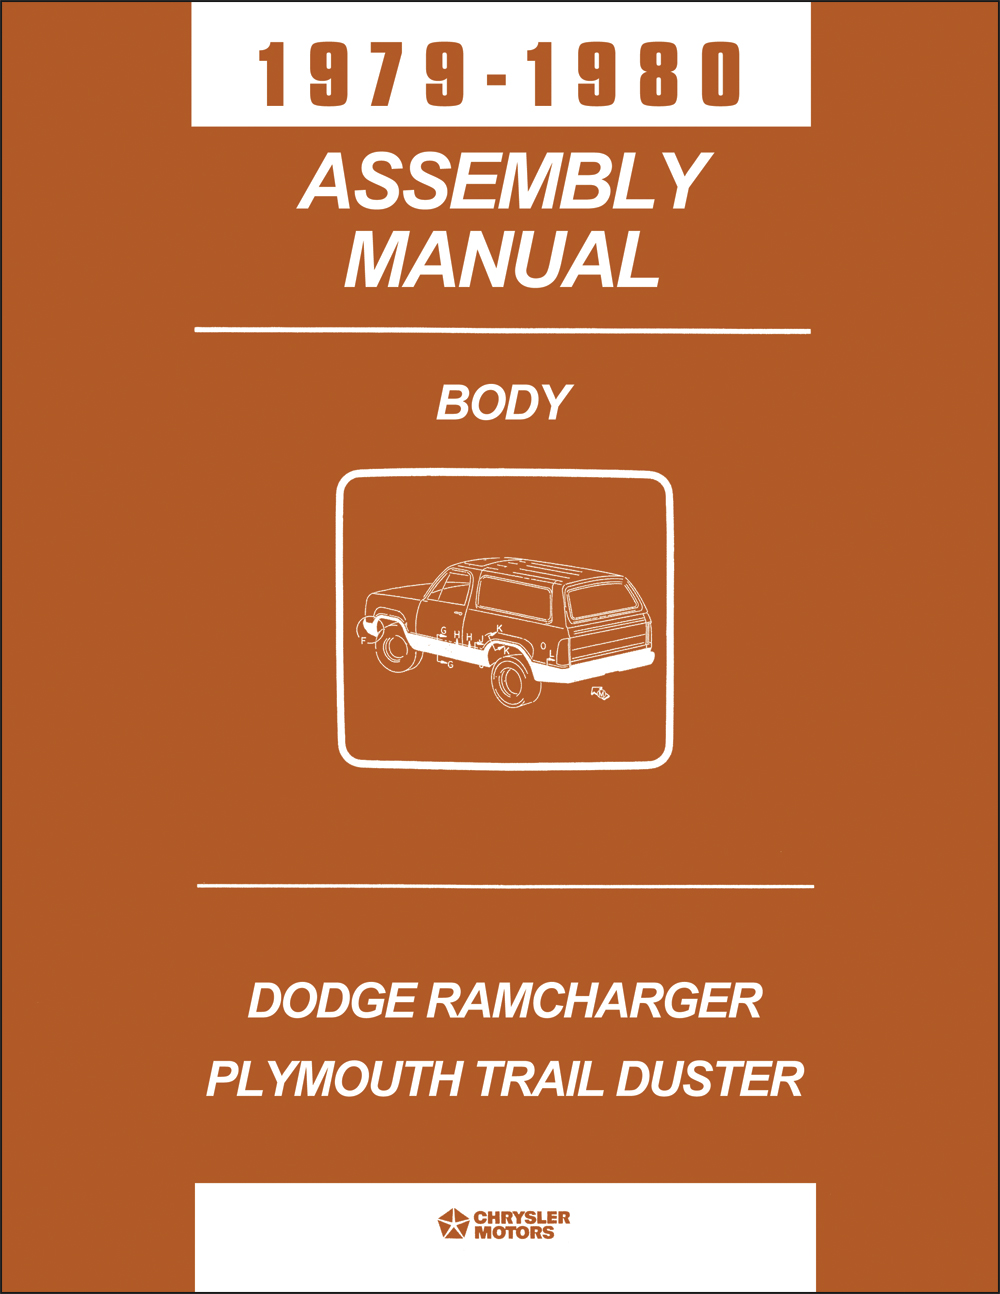 1979-1980 Dodge Ramcharger and Plymouth Trail Duster Body Assembly Manual Reprint